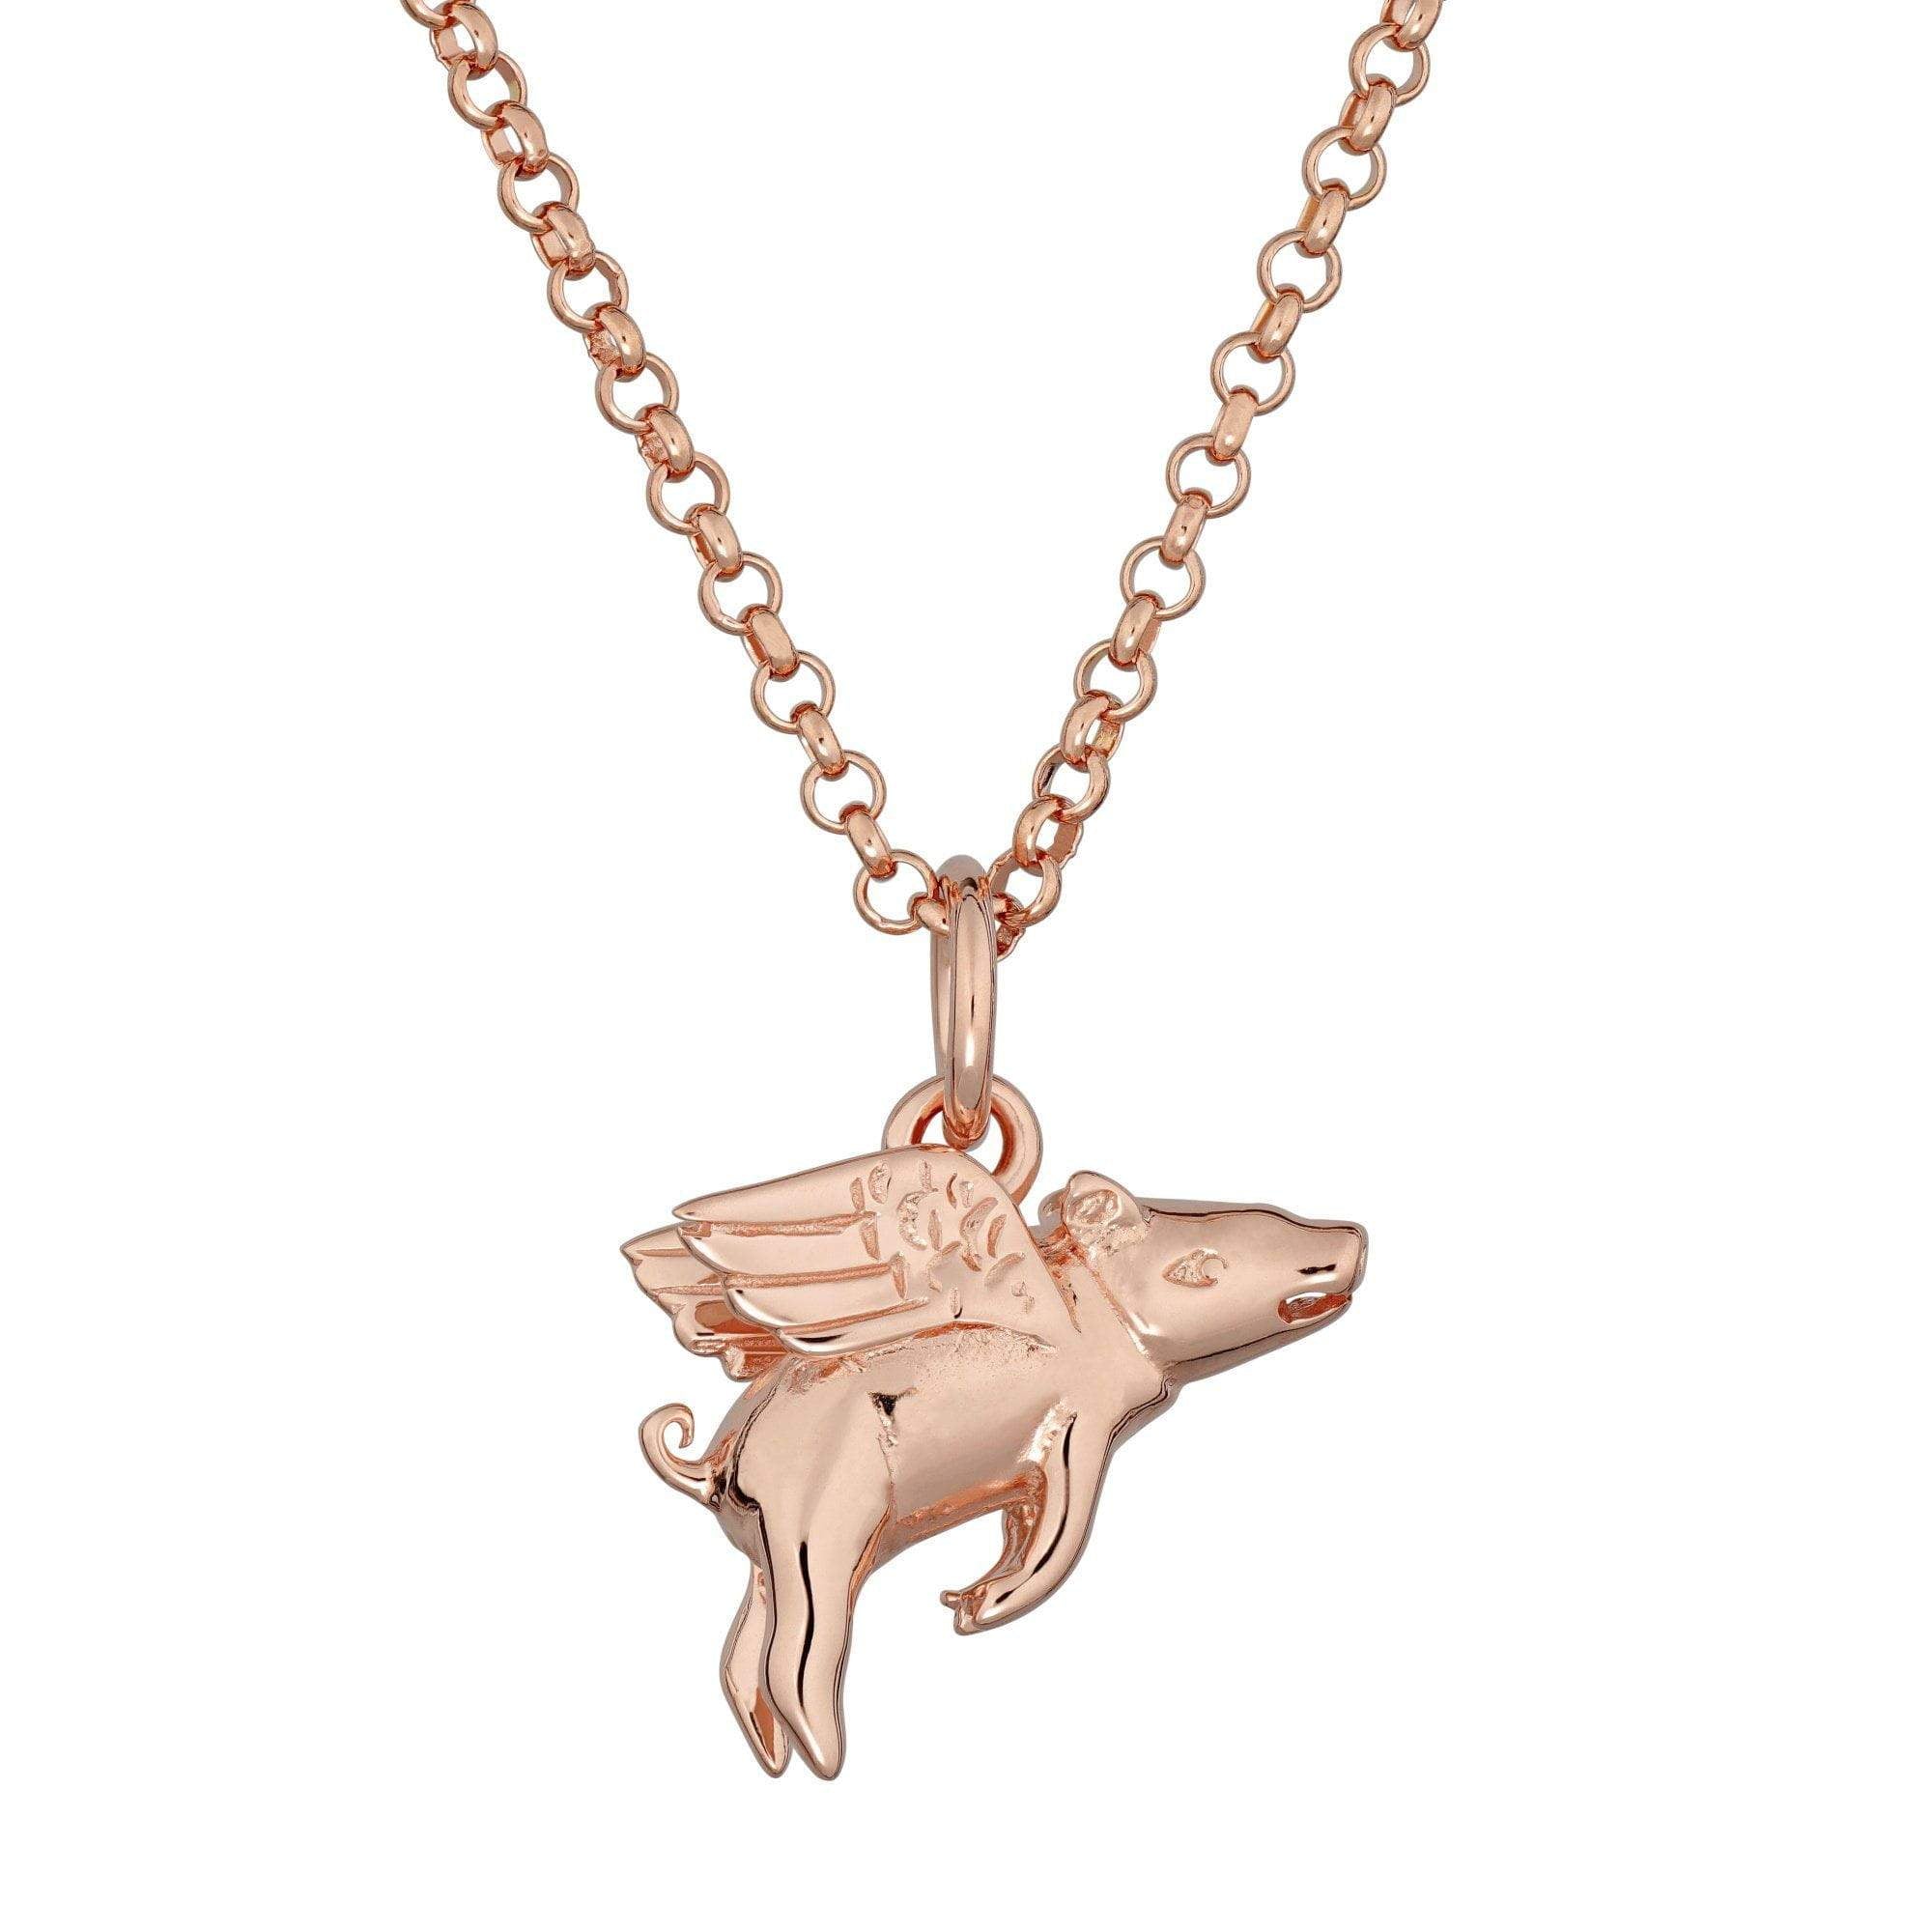  Flying Pig Necklace - by Scream Pretty